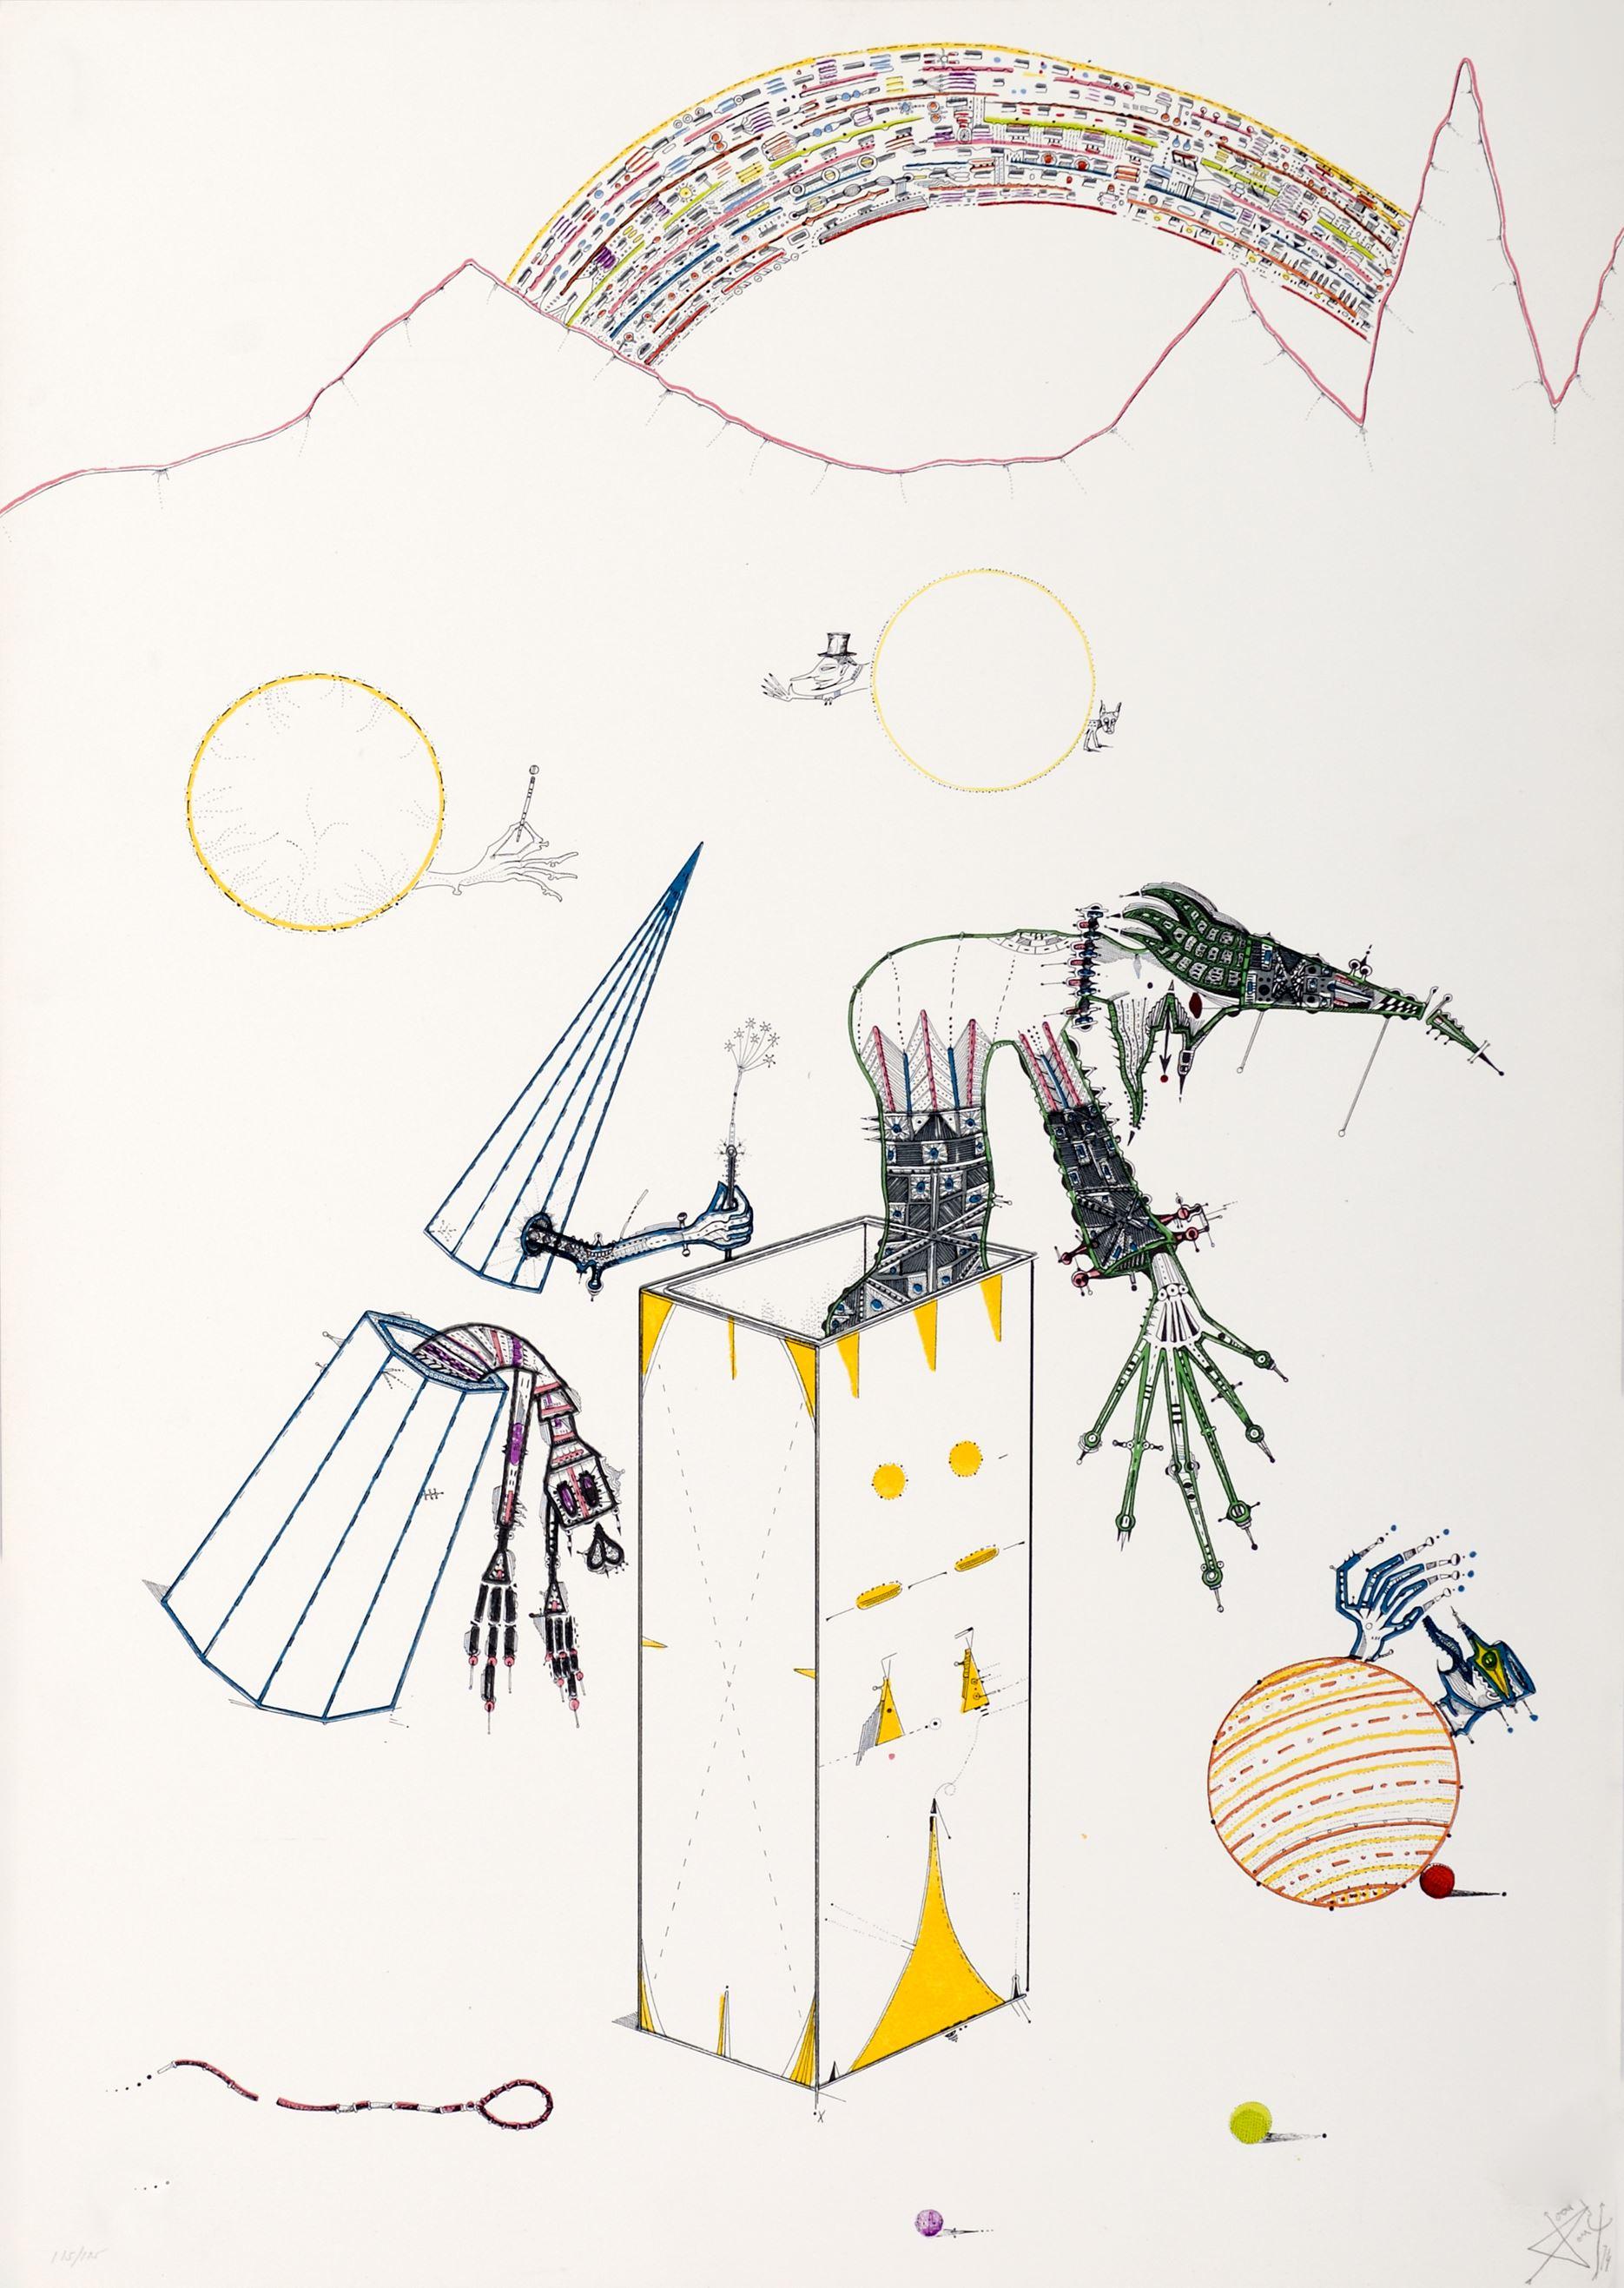 Joan Ponç (Spain, 1927-1984)
'Sin título', 1974
silkscreen on paper
27.2 x 18.9 in. (69 x 48 cm.)
Edition of 125
ID: PON1135-001-125
Hand-signed by author
_______________________________________________________
Joan Ponç was a Spanish artist and one